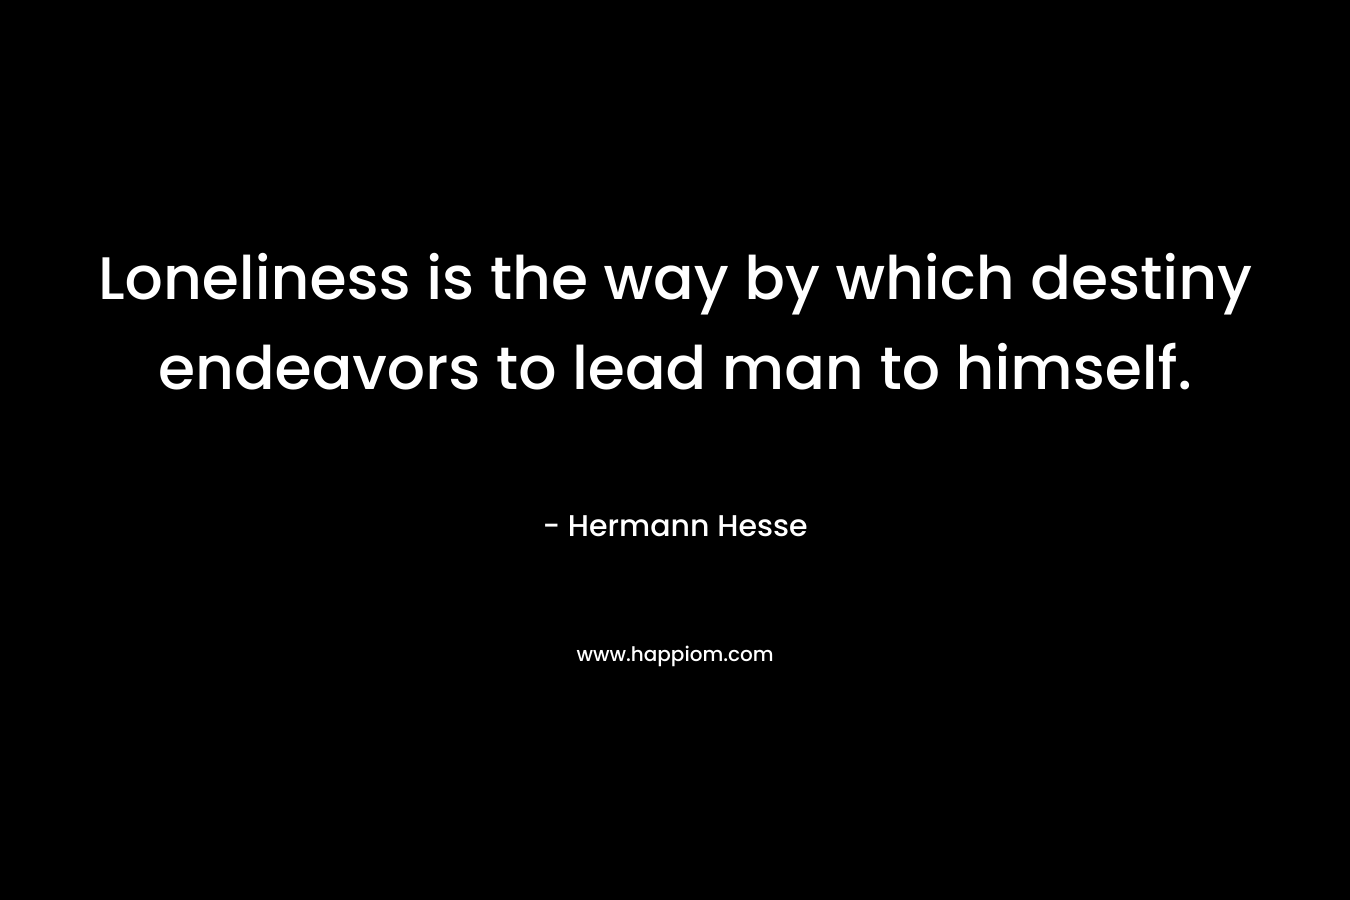 Loneliness is the way by which destiny endeavors to lead man to himself. – Hermann Hesse